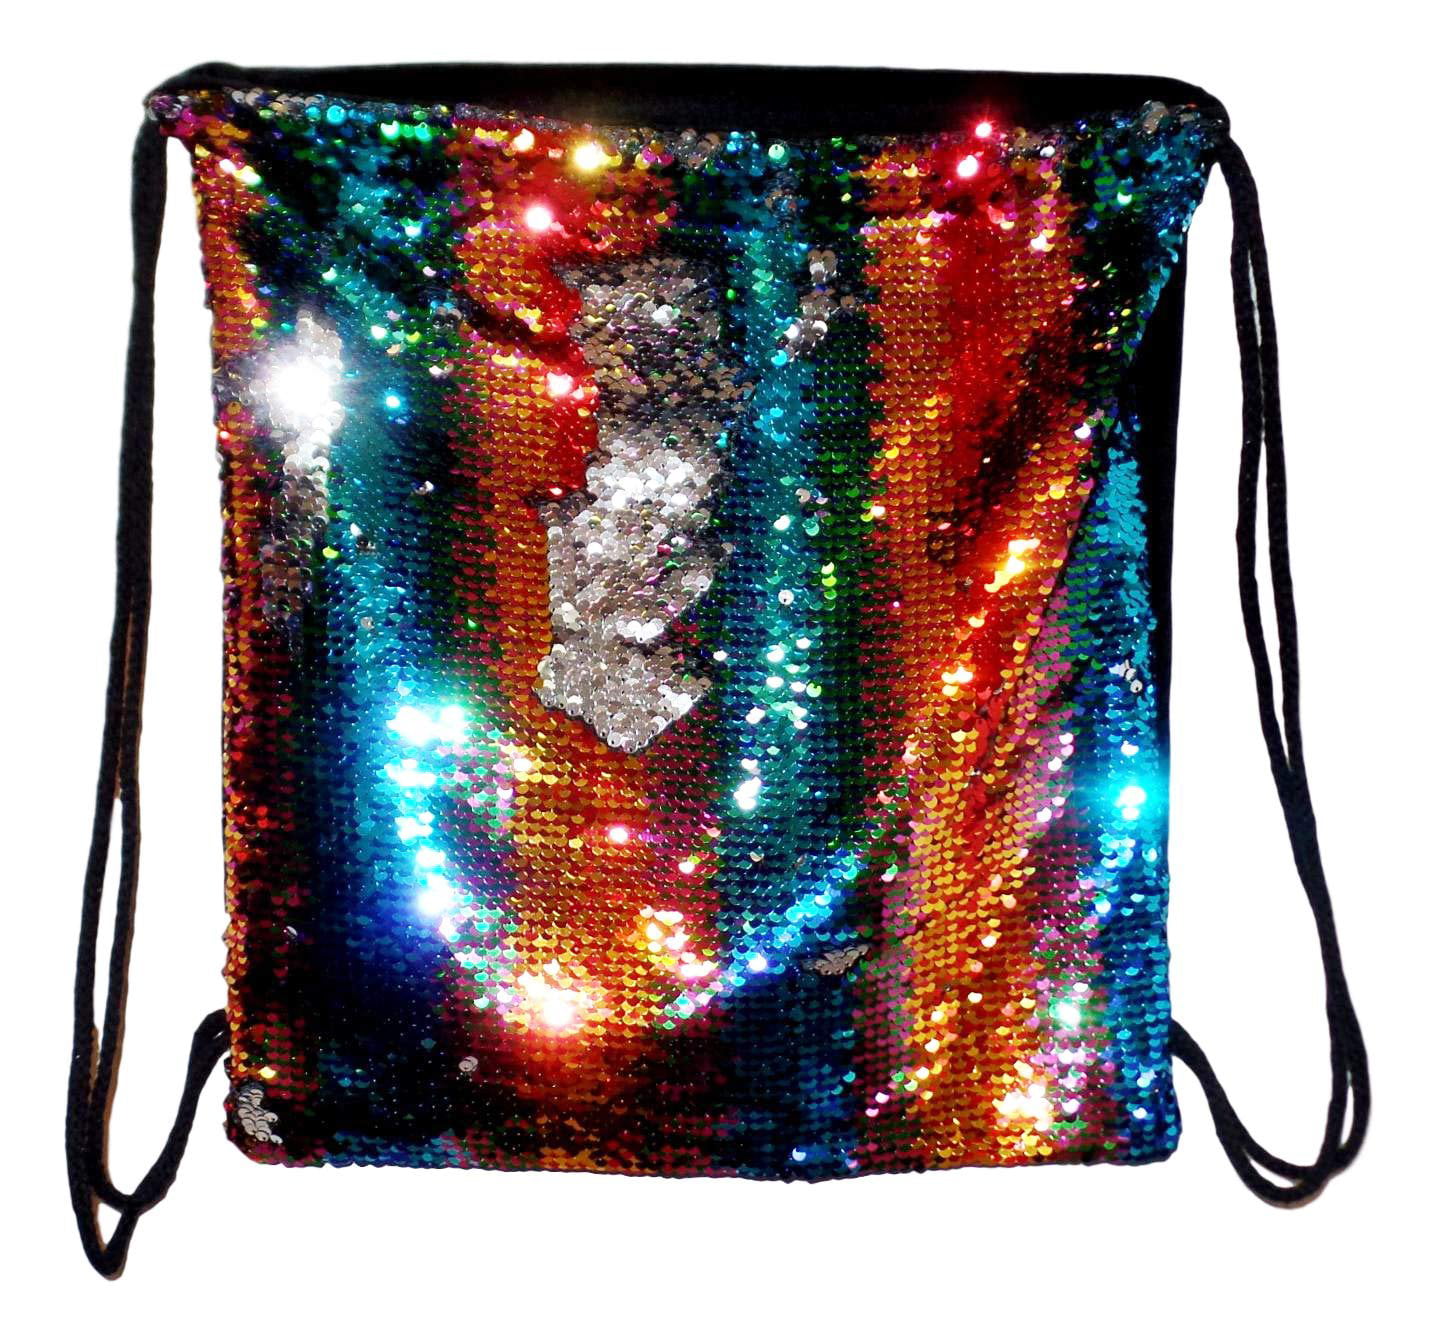 TEAL BLUE MERMAID TAIL Flip Sequin Backpack Drawstring Glitter Bag For School Gym Dance Hiking Beach Travel and More 